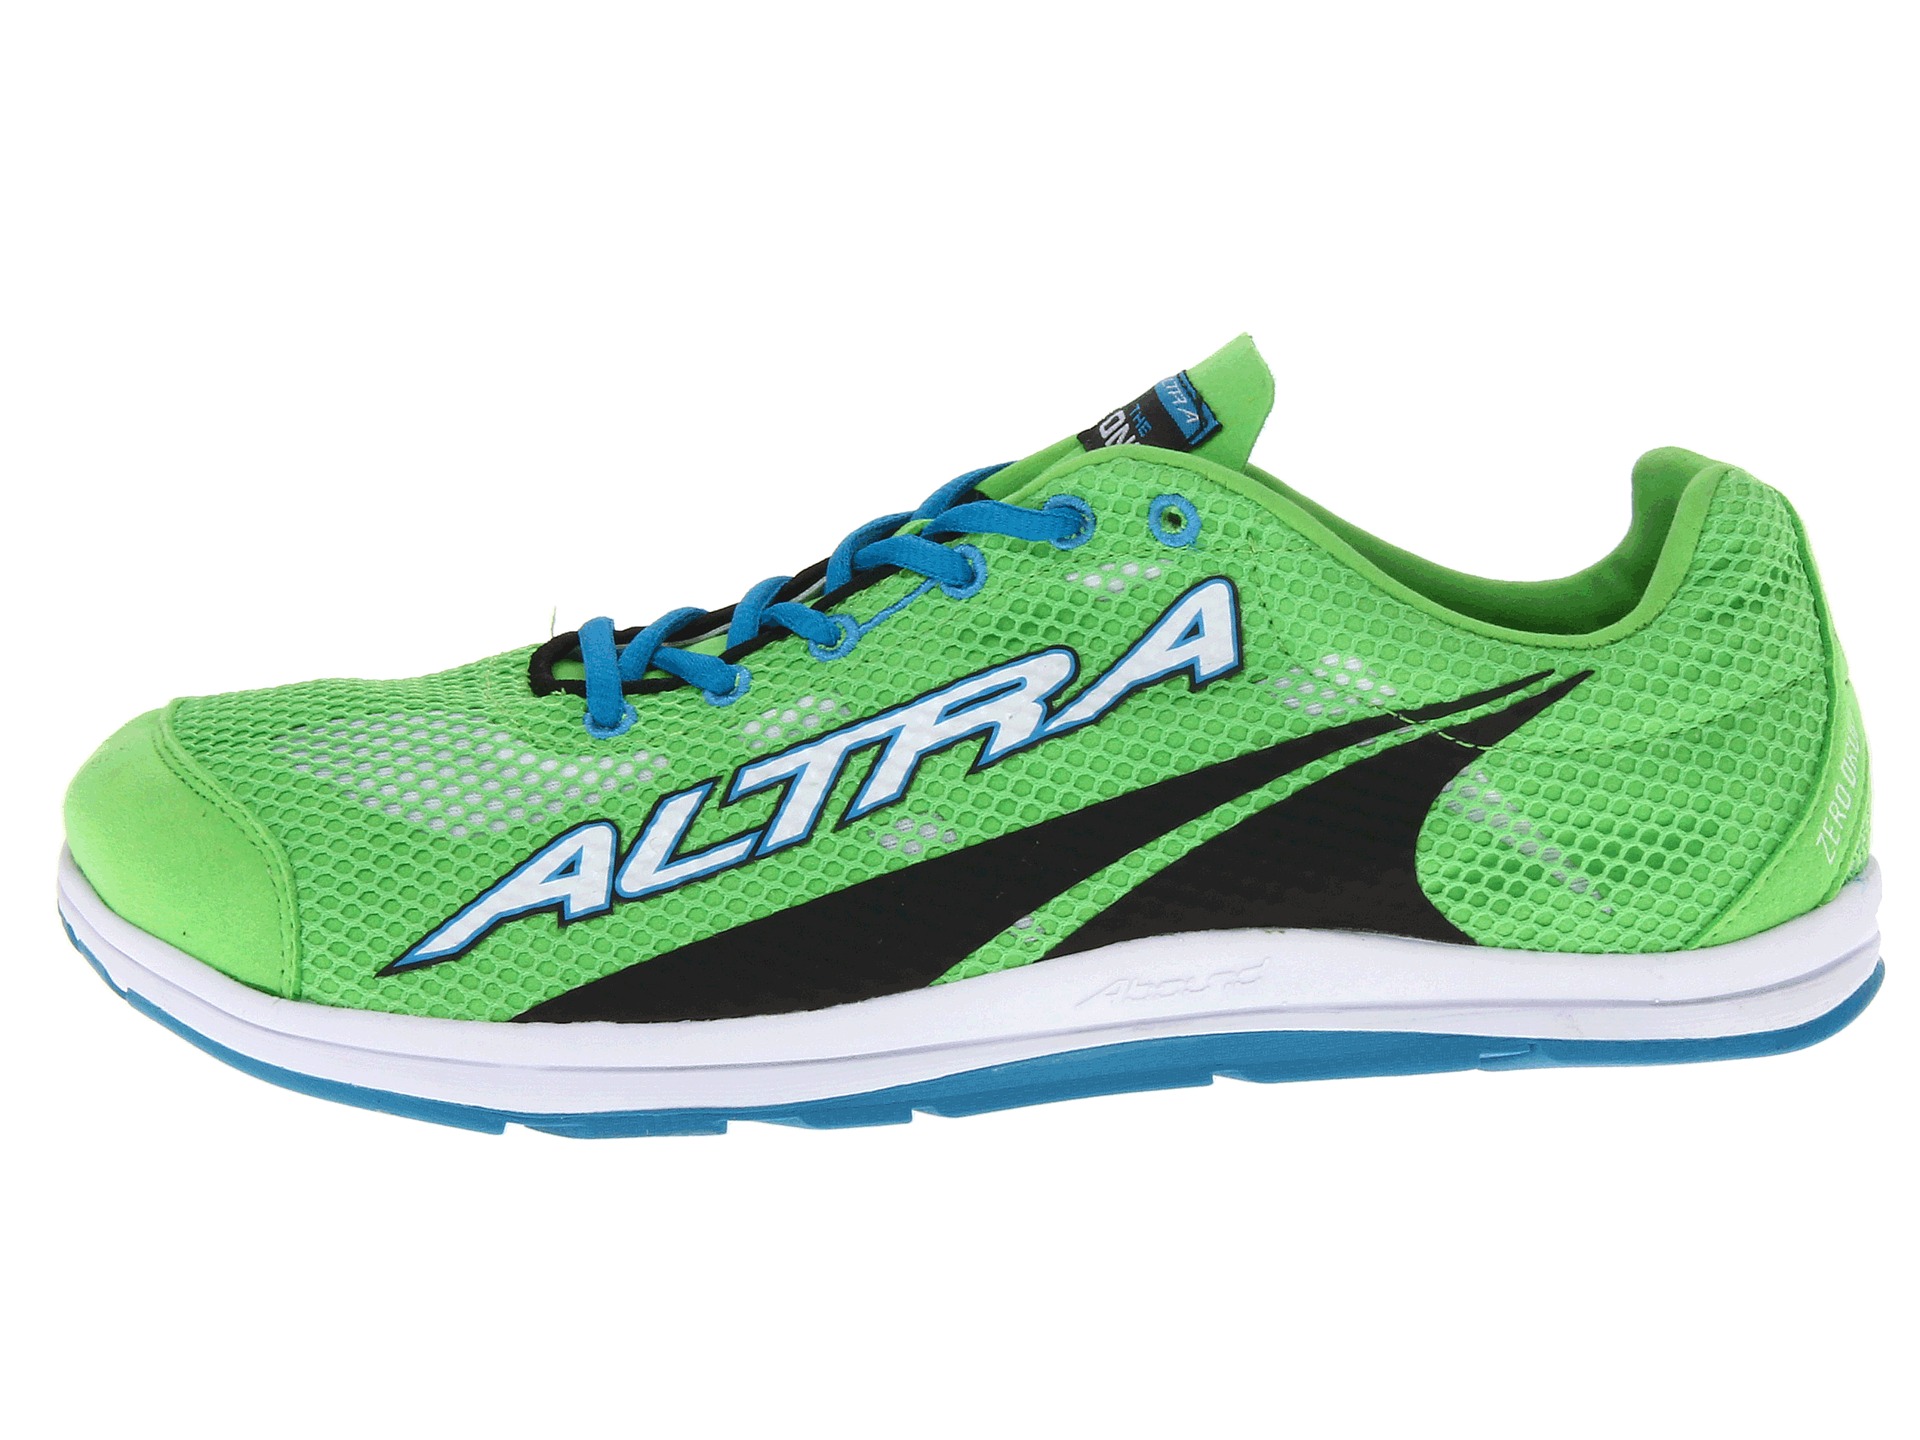 Altra Zero Drop Footwear The One M | Shipped Free at Zappos